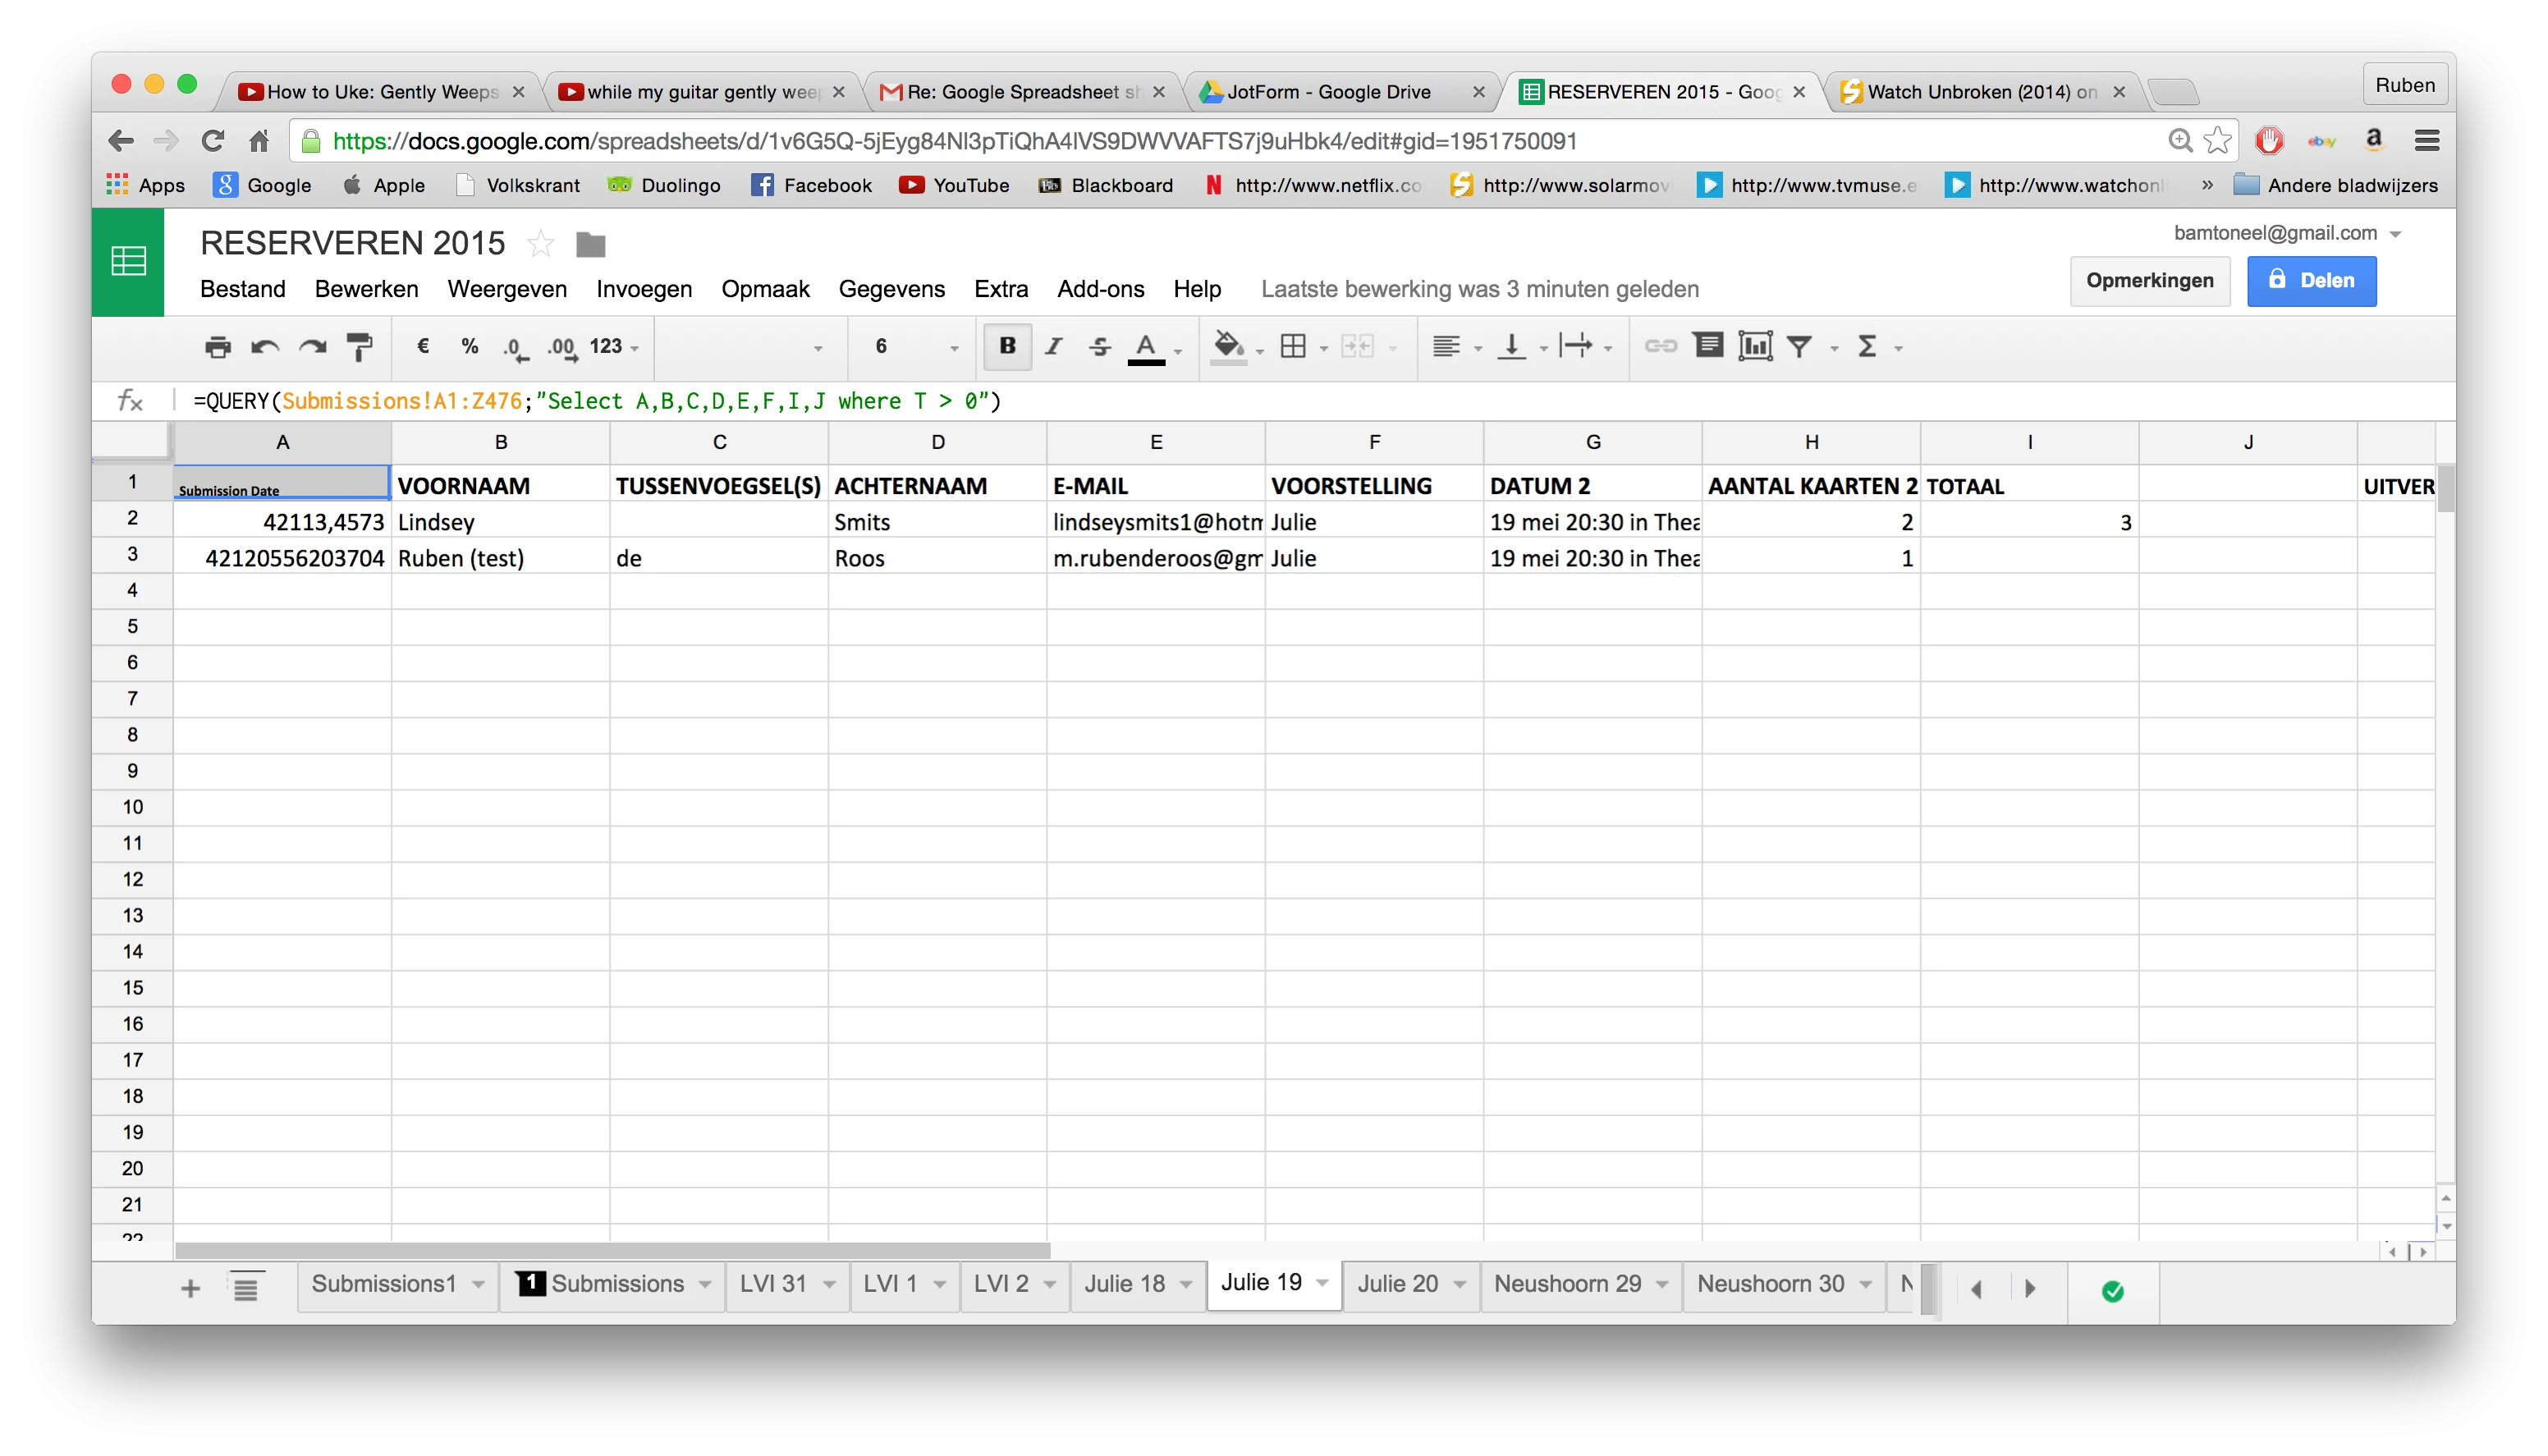 Google Spreadsheet shows faulty dates for made submissions Image 2 Screenshot 41